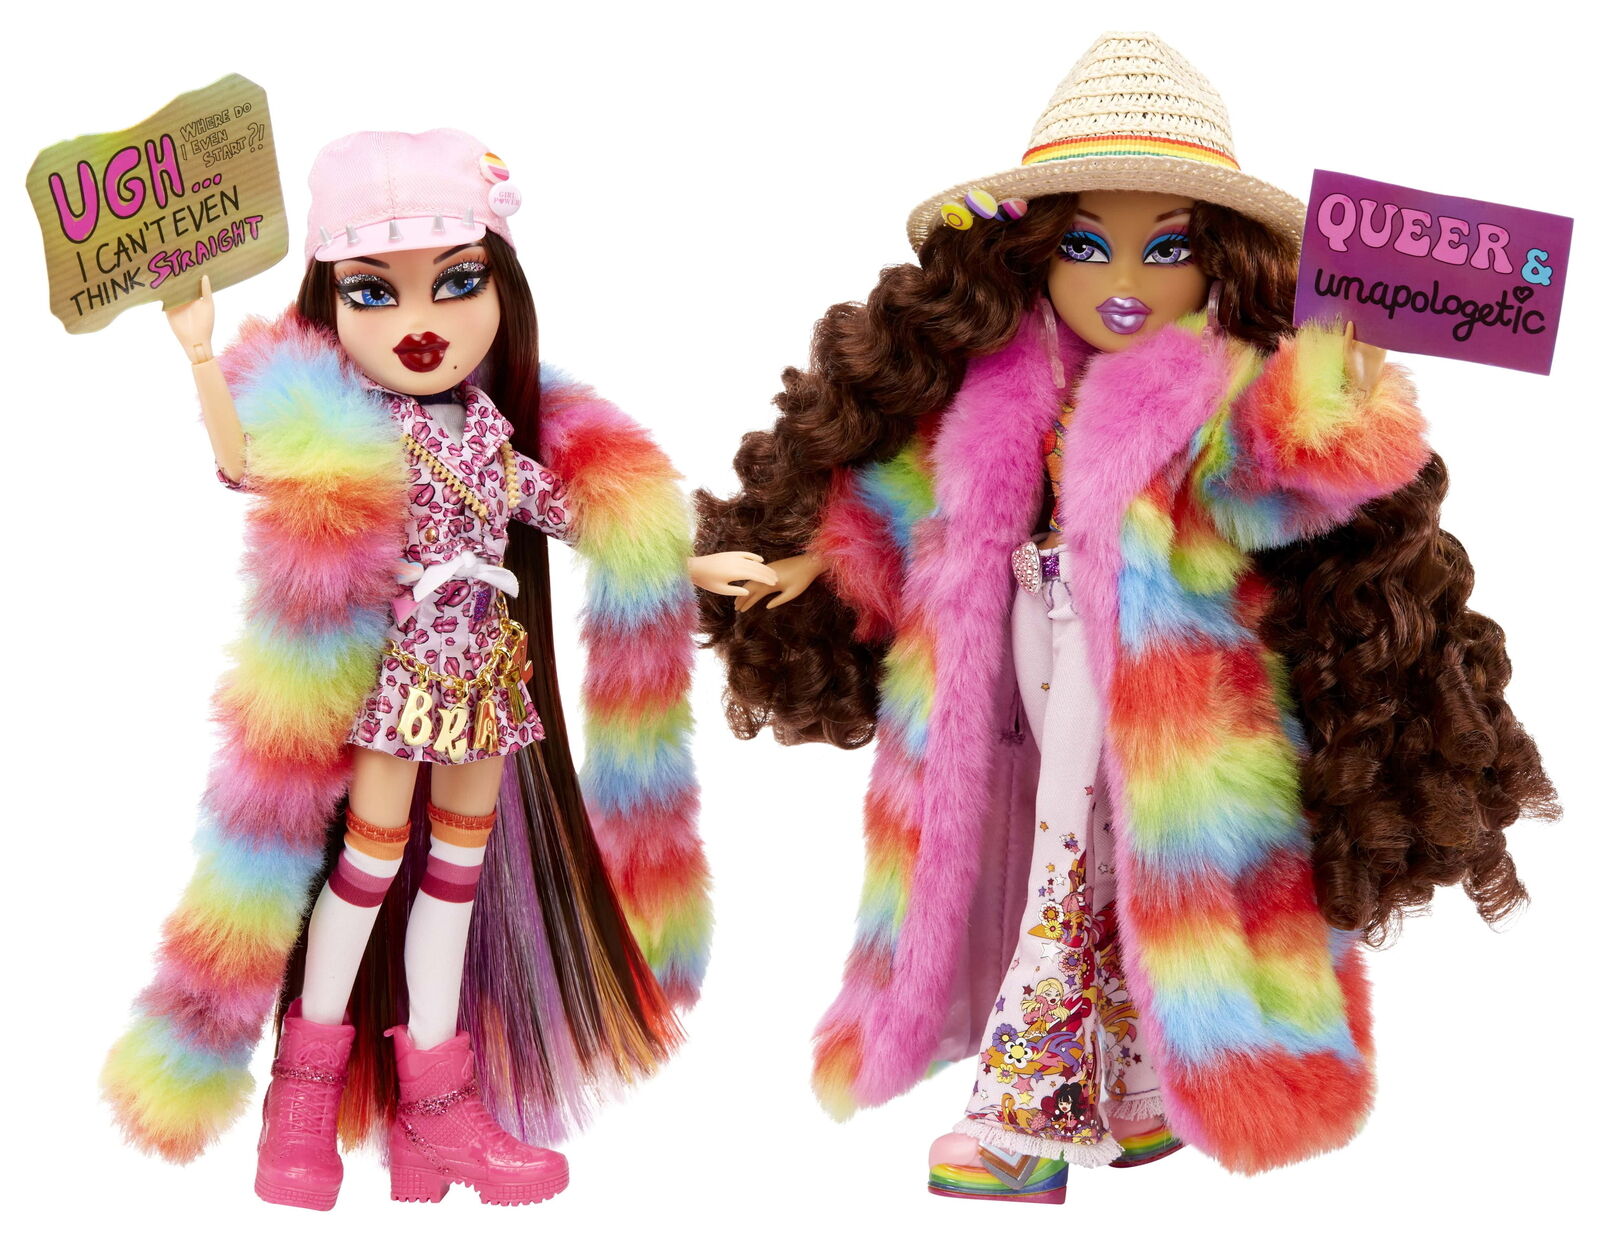 Special Edition Designer Pride 2-Pack Fashion Dolls Assembled 12 inch